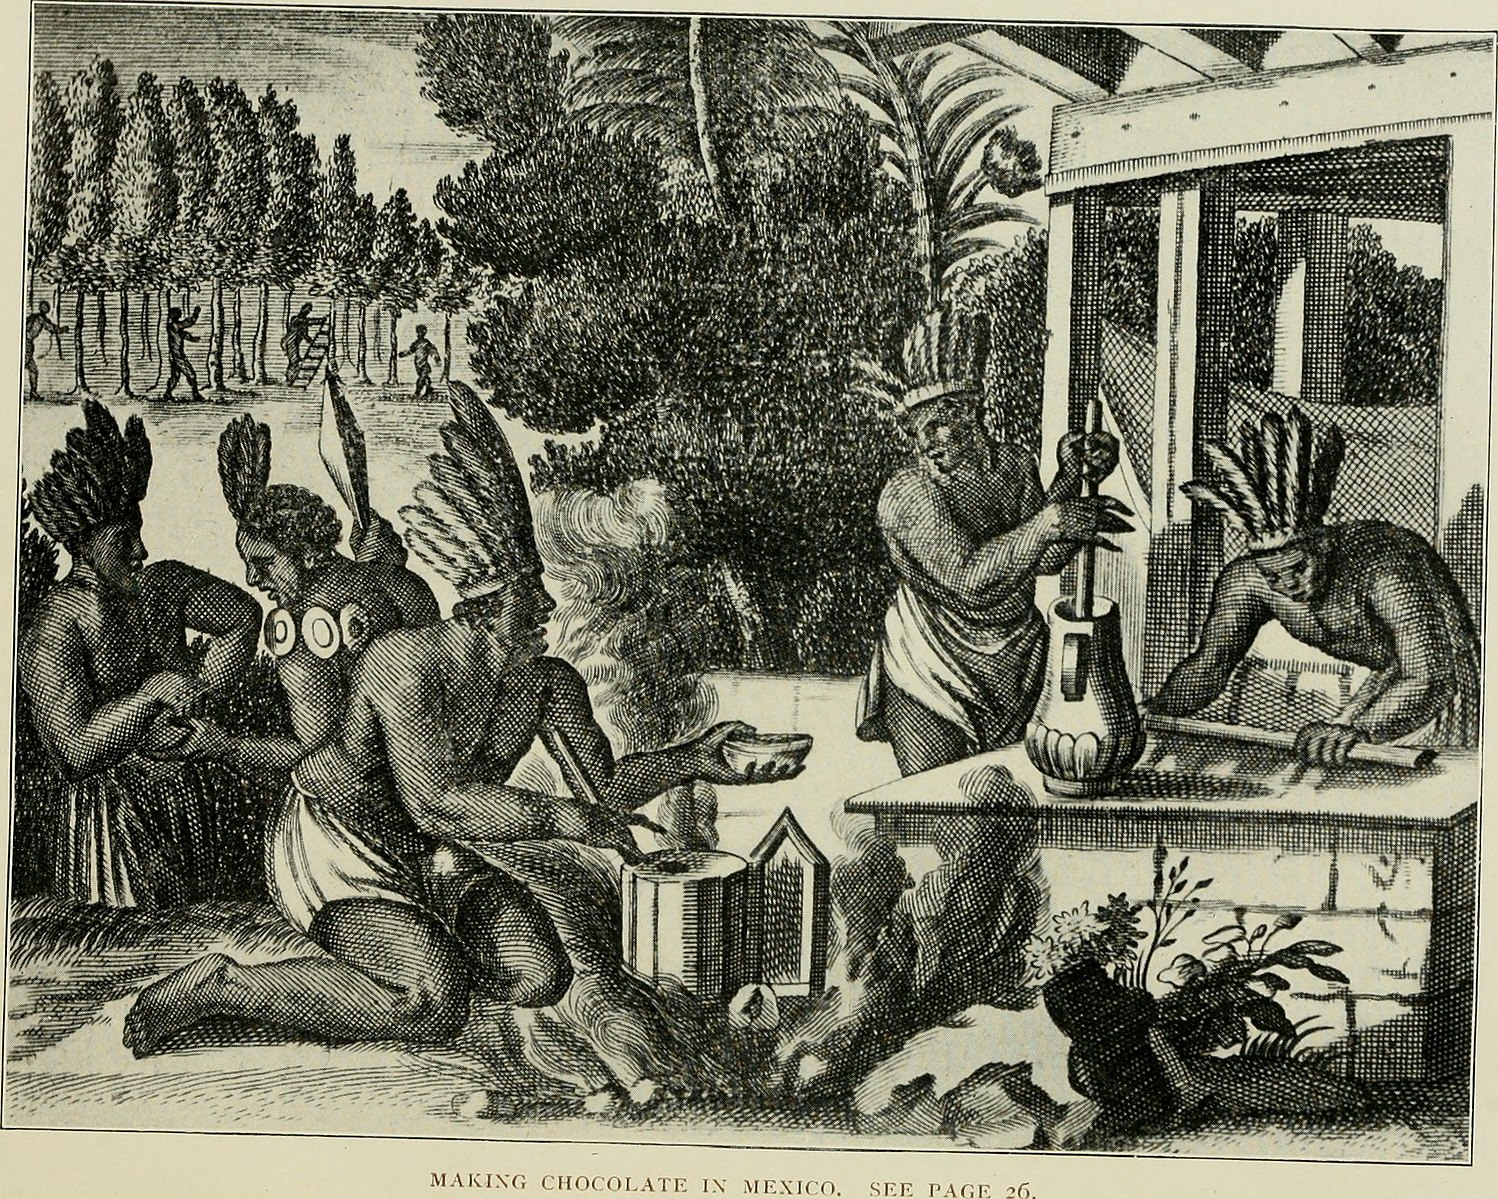 Native American Indians roasting and grinding the beans, and mixing the chocolate in a jug with a whisk.